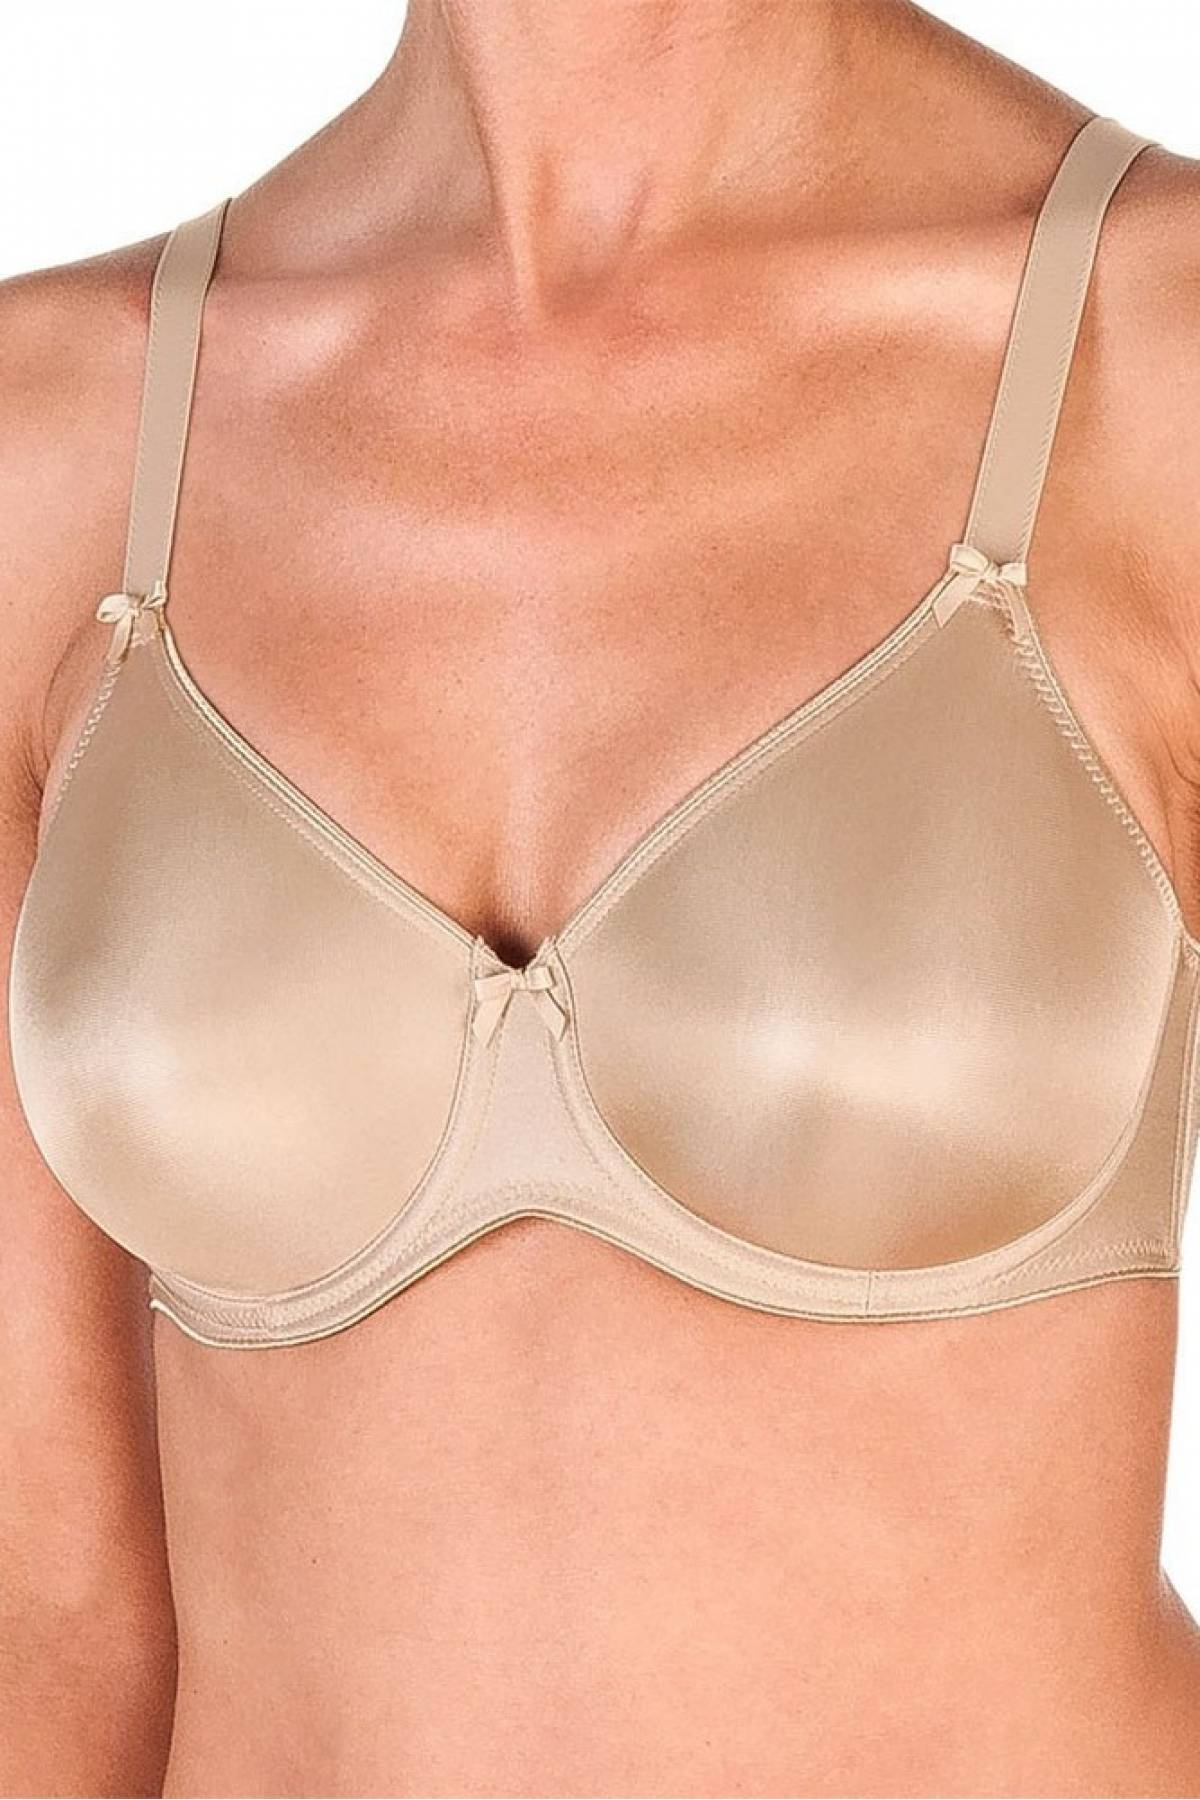 Felina 202222 Underwired Thermoformed Bra DIVINE VISION light taupe